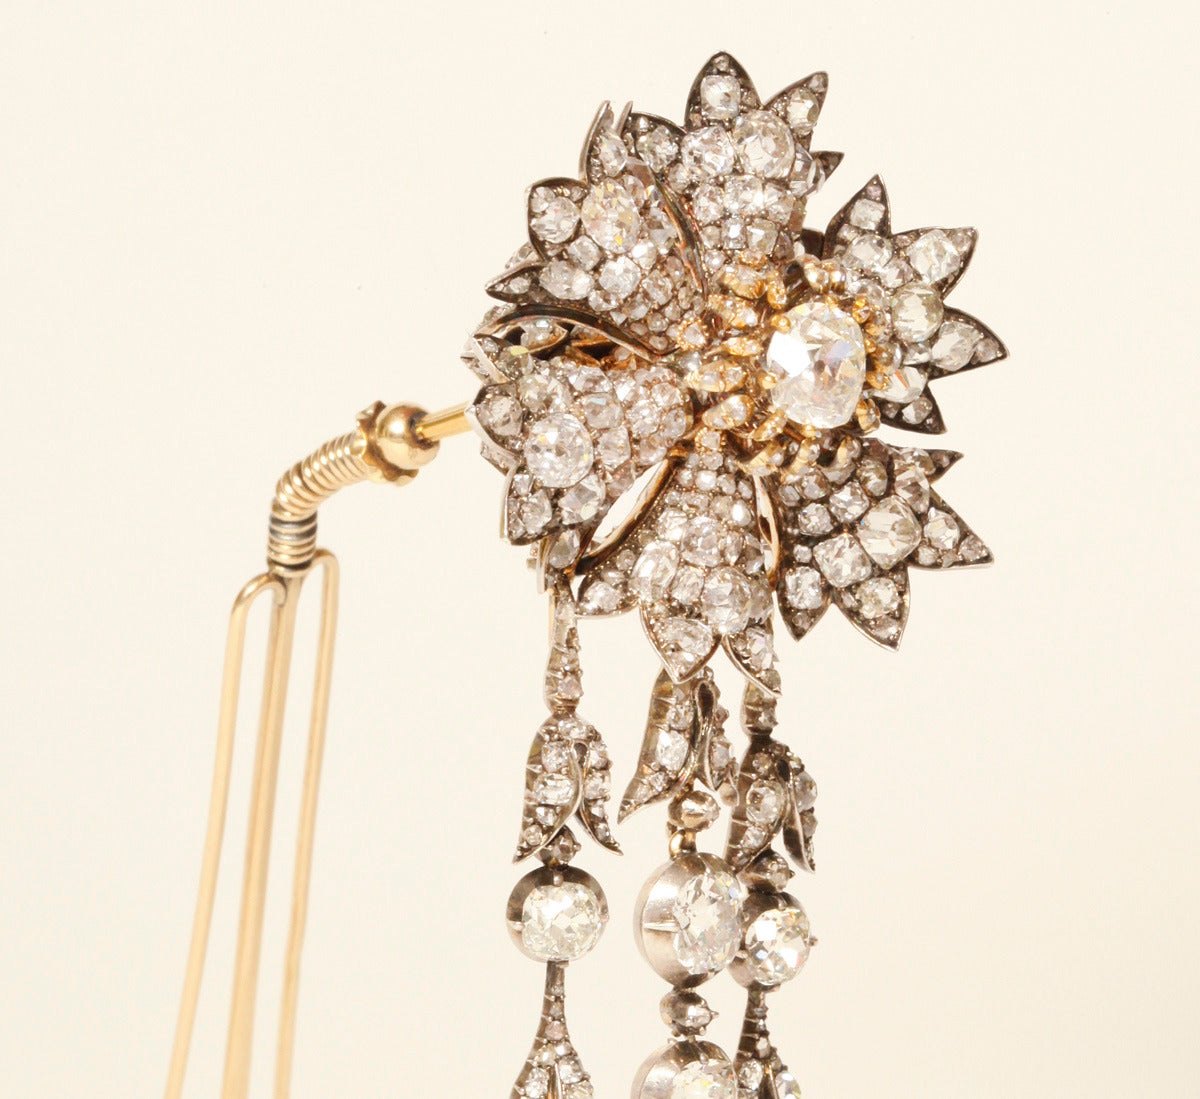 Diamond cornflower hair ornament, set en tremblant, with three detachable, articulated en pampille diamond strands, and mounted in gold and silver on a three-pronged comb. This jewel is similar in design to pieces in the French Crown Jewels, sold in